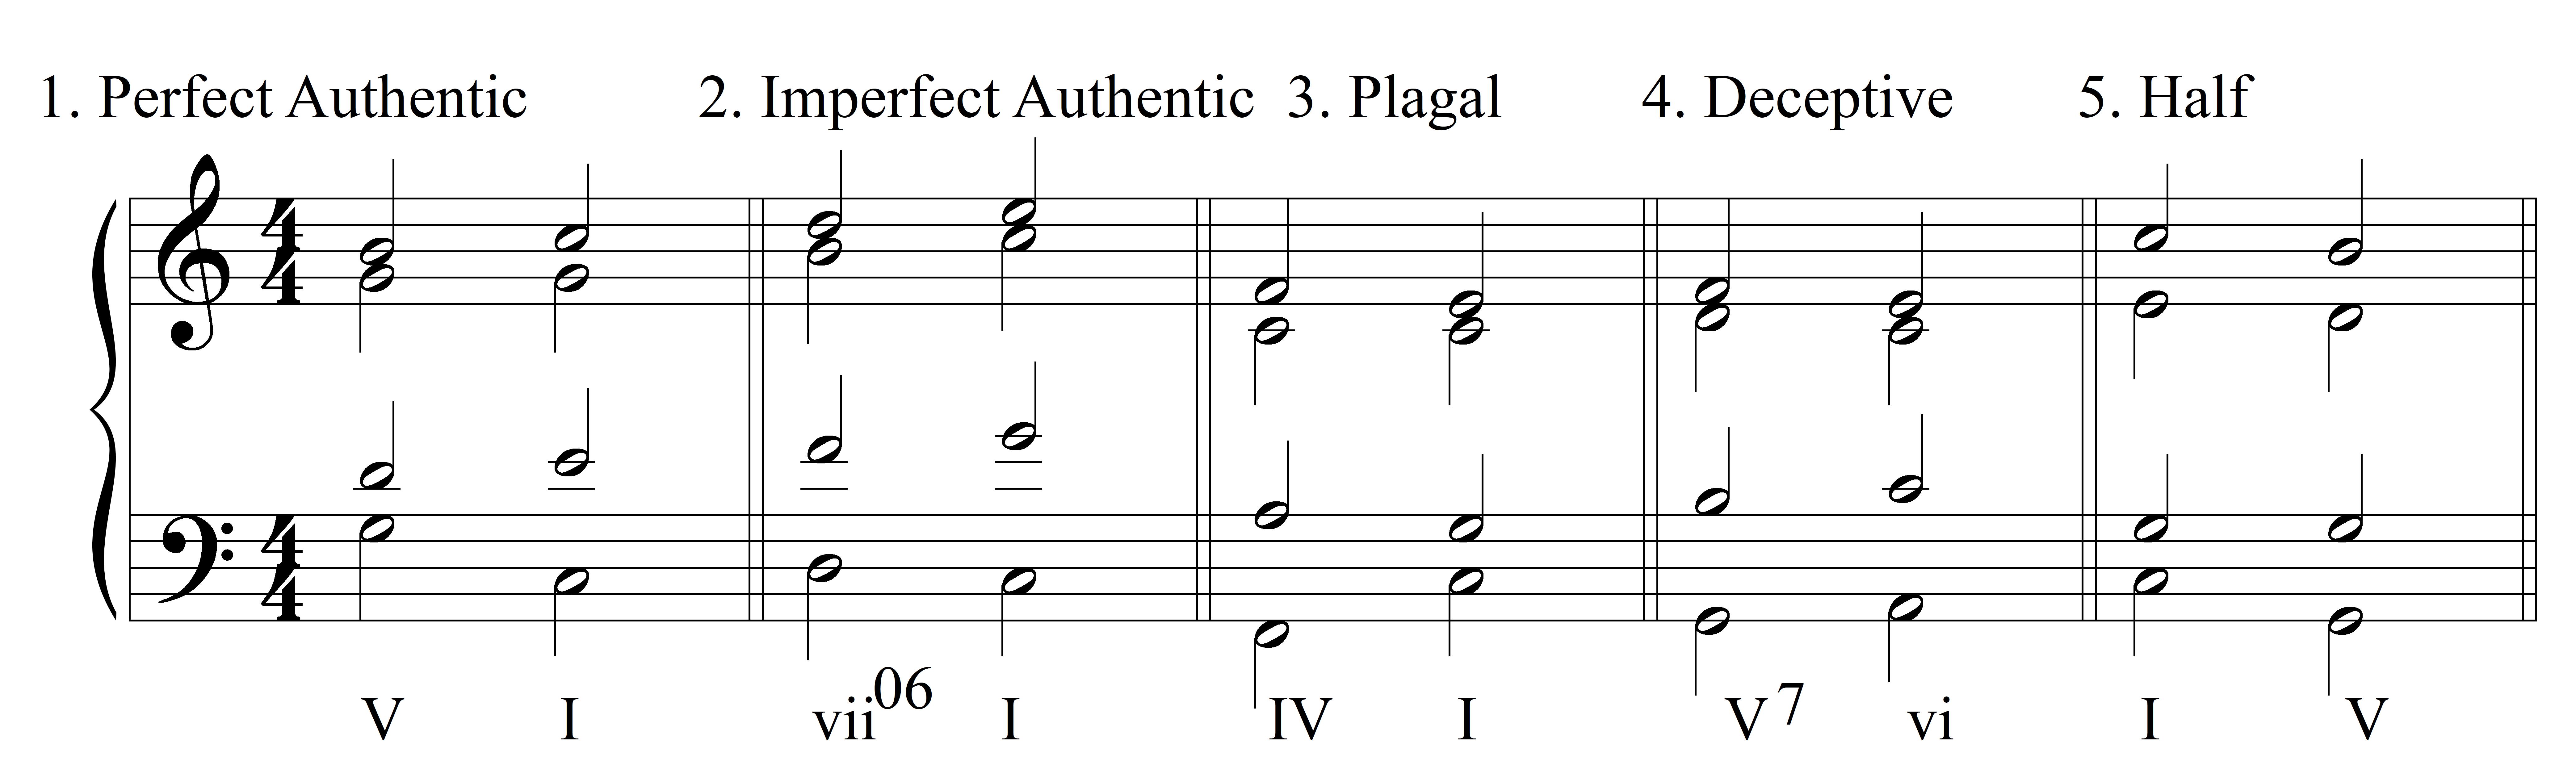 ii analyzing seventh chords in musical contexts